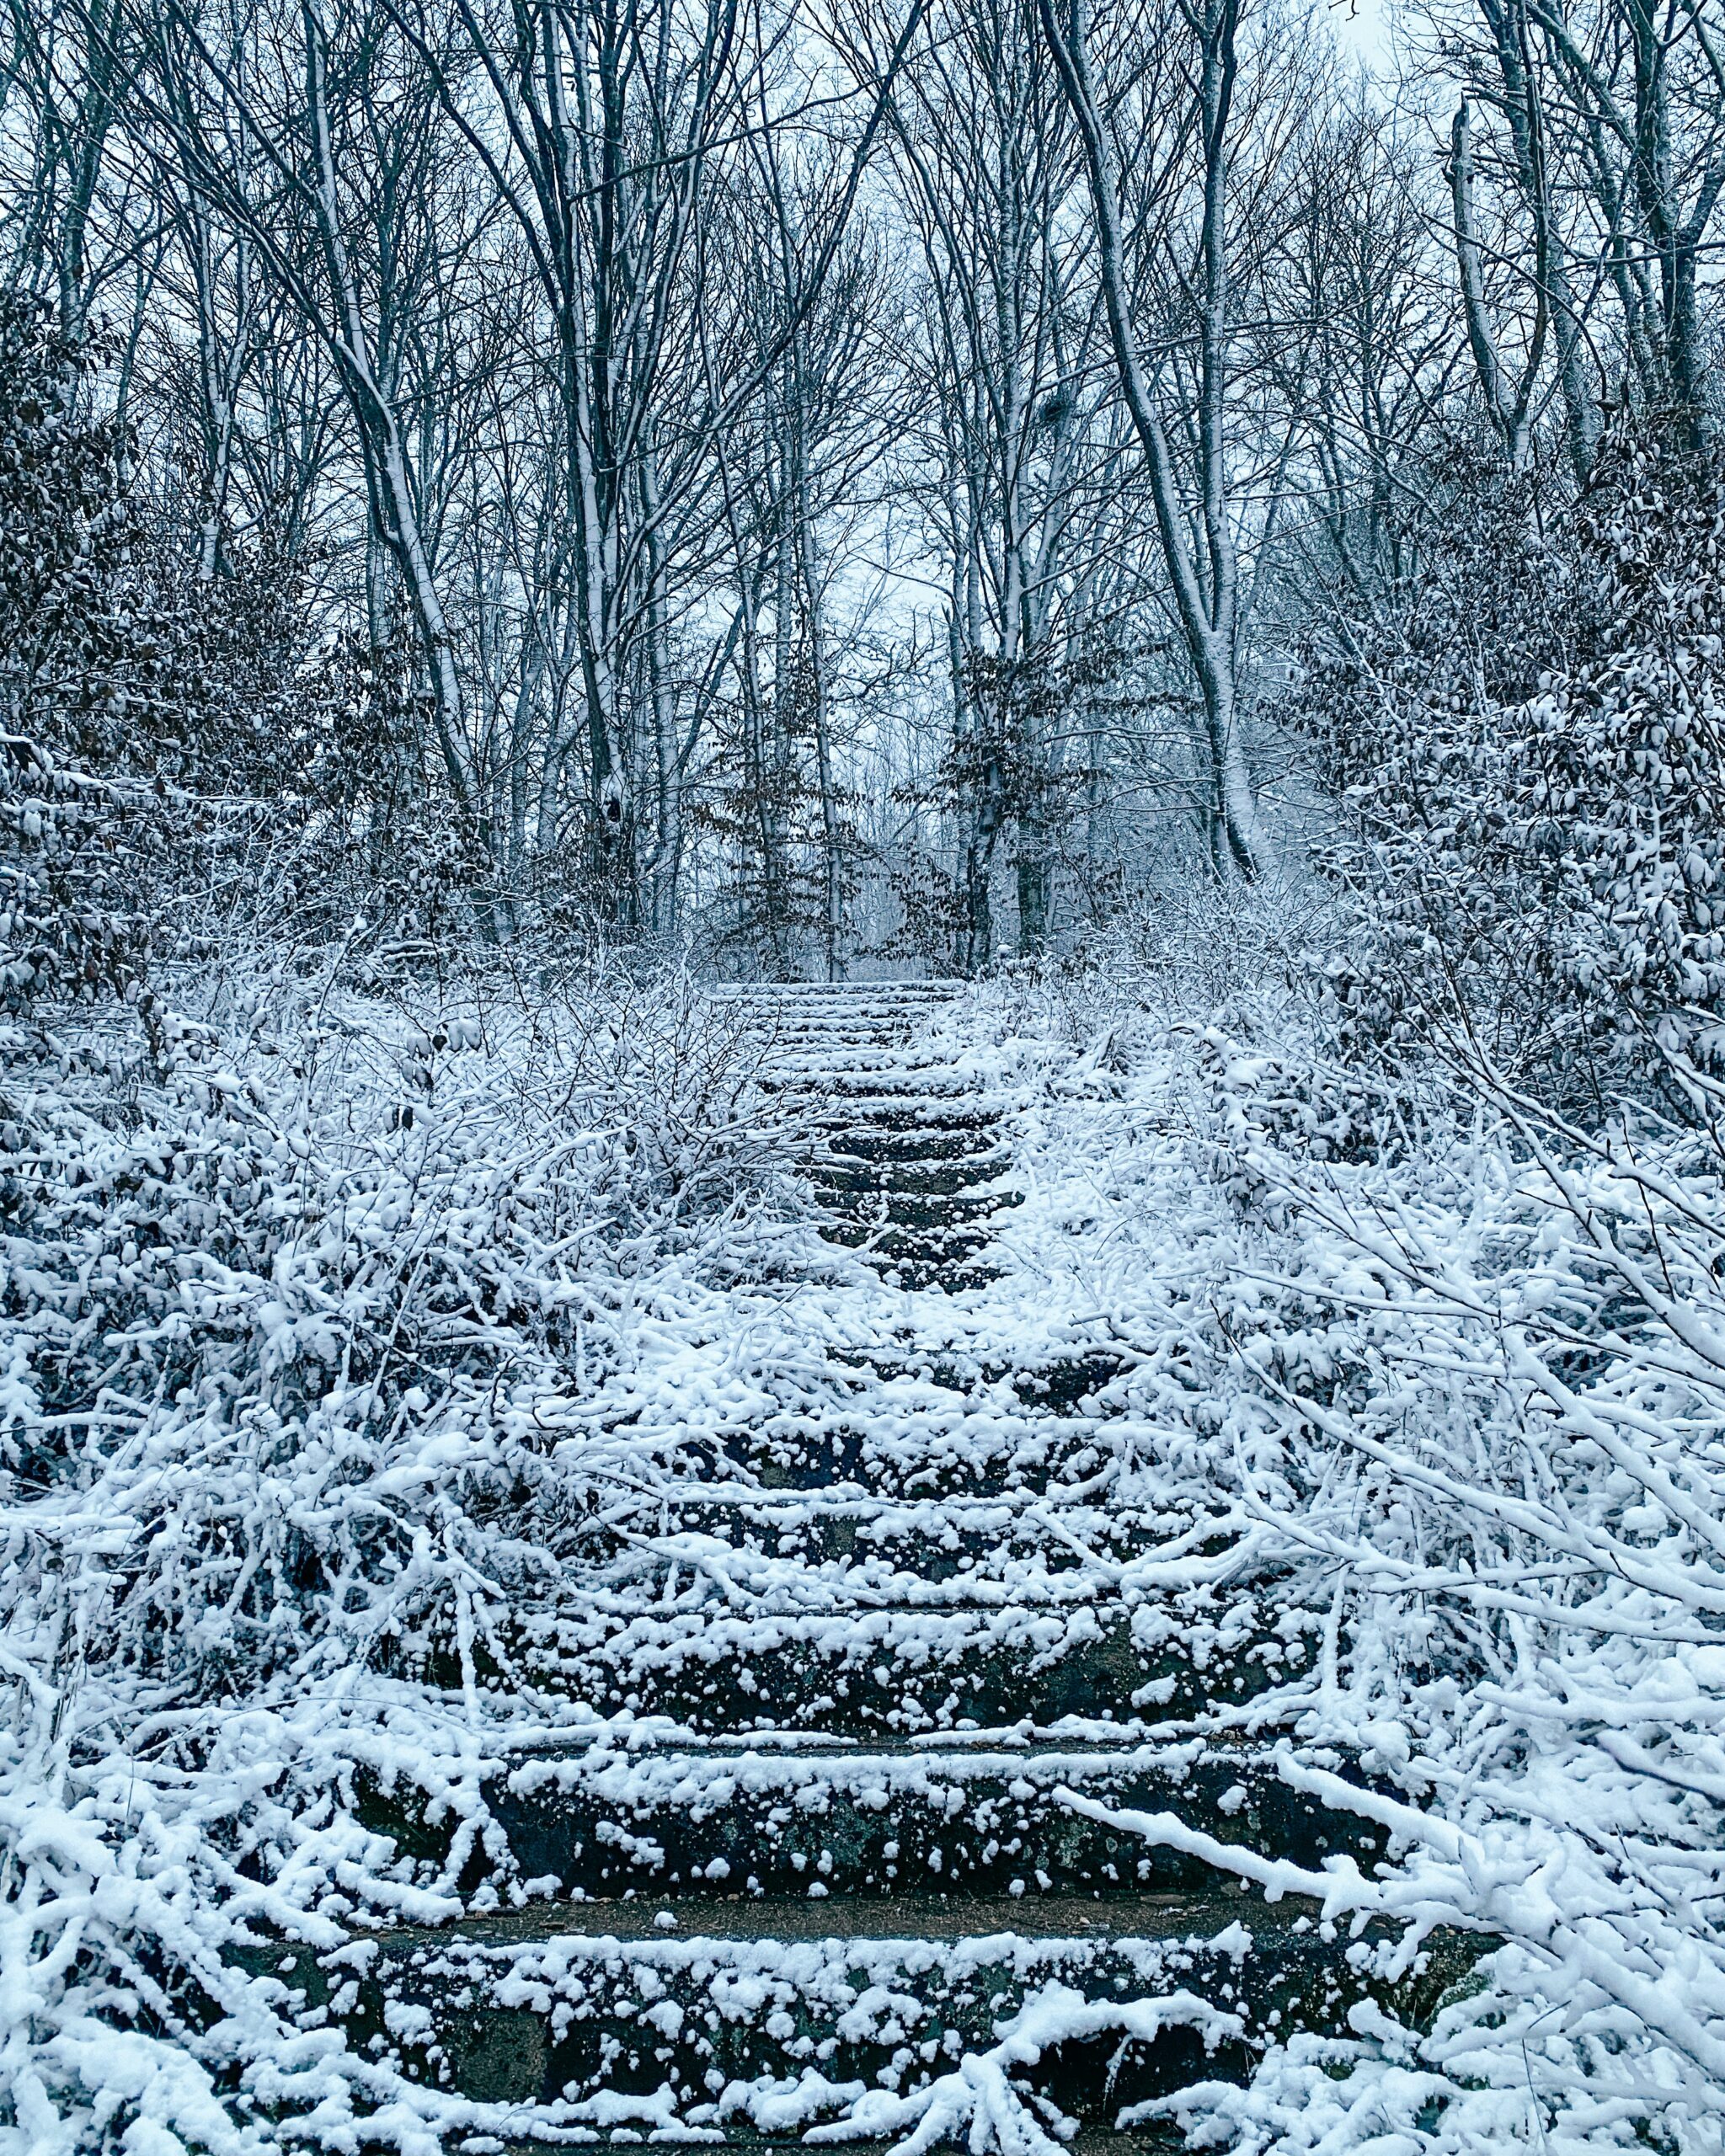 Fresh Snow or Ice! Preventing a Slip Fall on Slippery Stairs